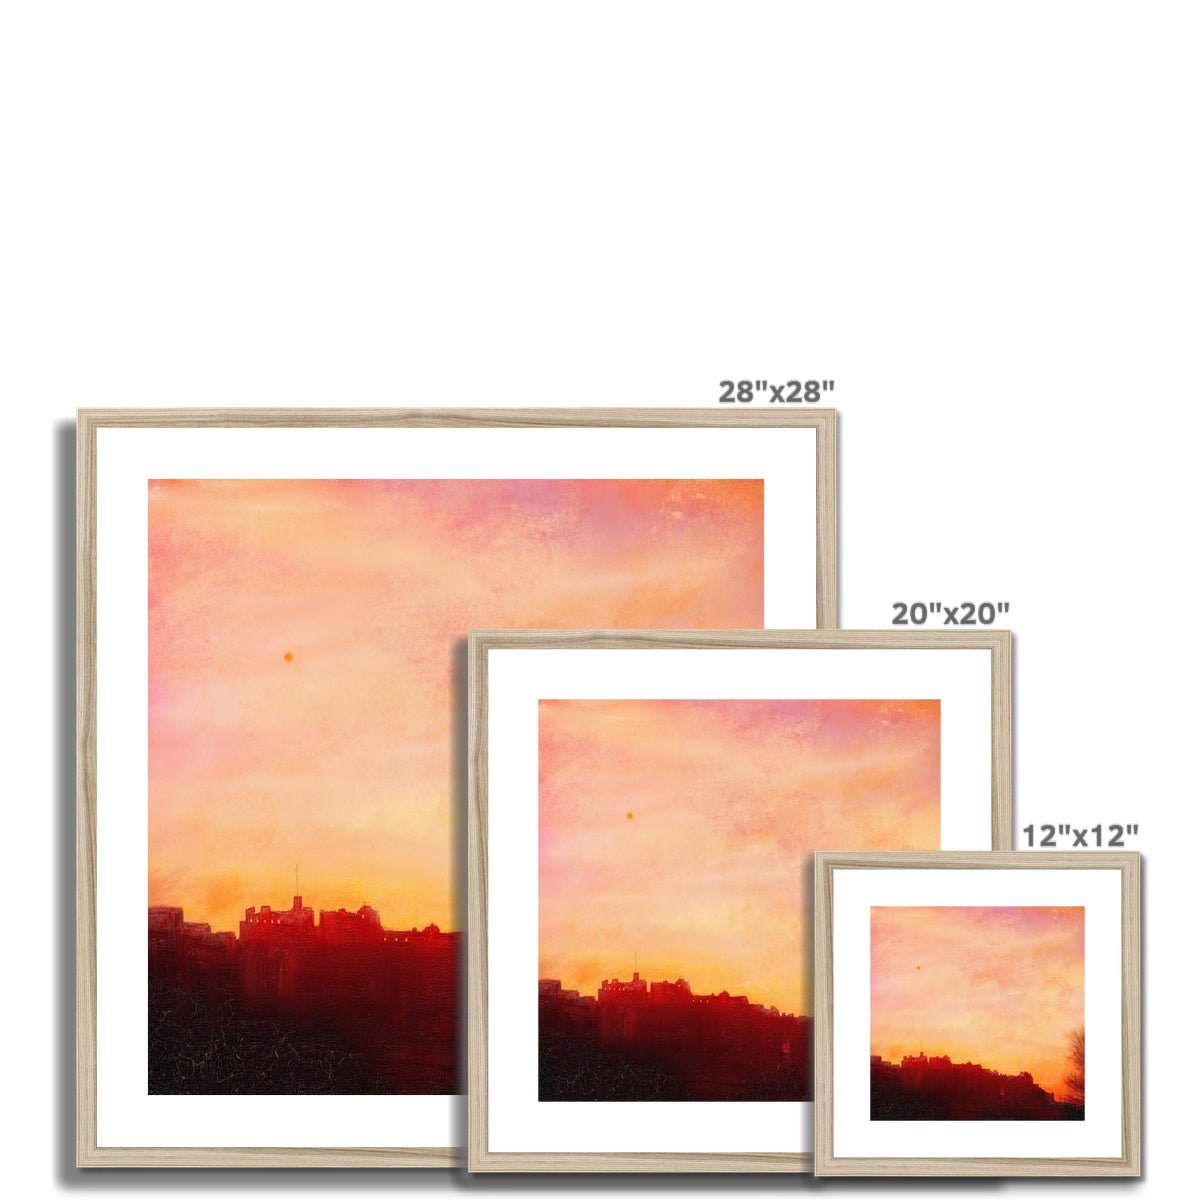 Edinburgh Castle Sunset Painting | Framed & Mounted Prints From Scotland-Framed & Mounted Prints-Historic & Iconic Scotland Art Gallery-Paintings, Prints, Homeware, Art Gifts From Scotland By Scottish Artist Kevin Hunter